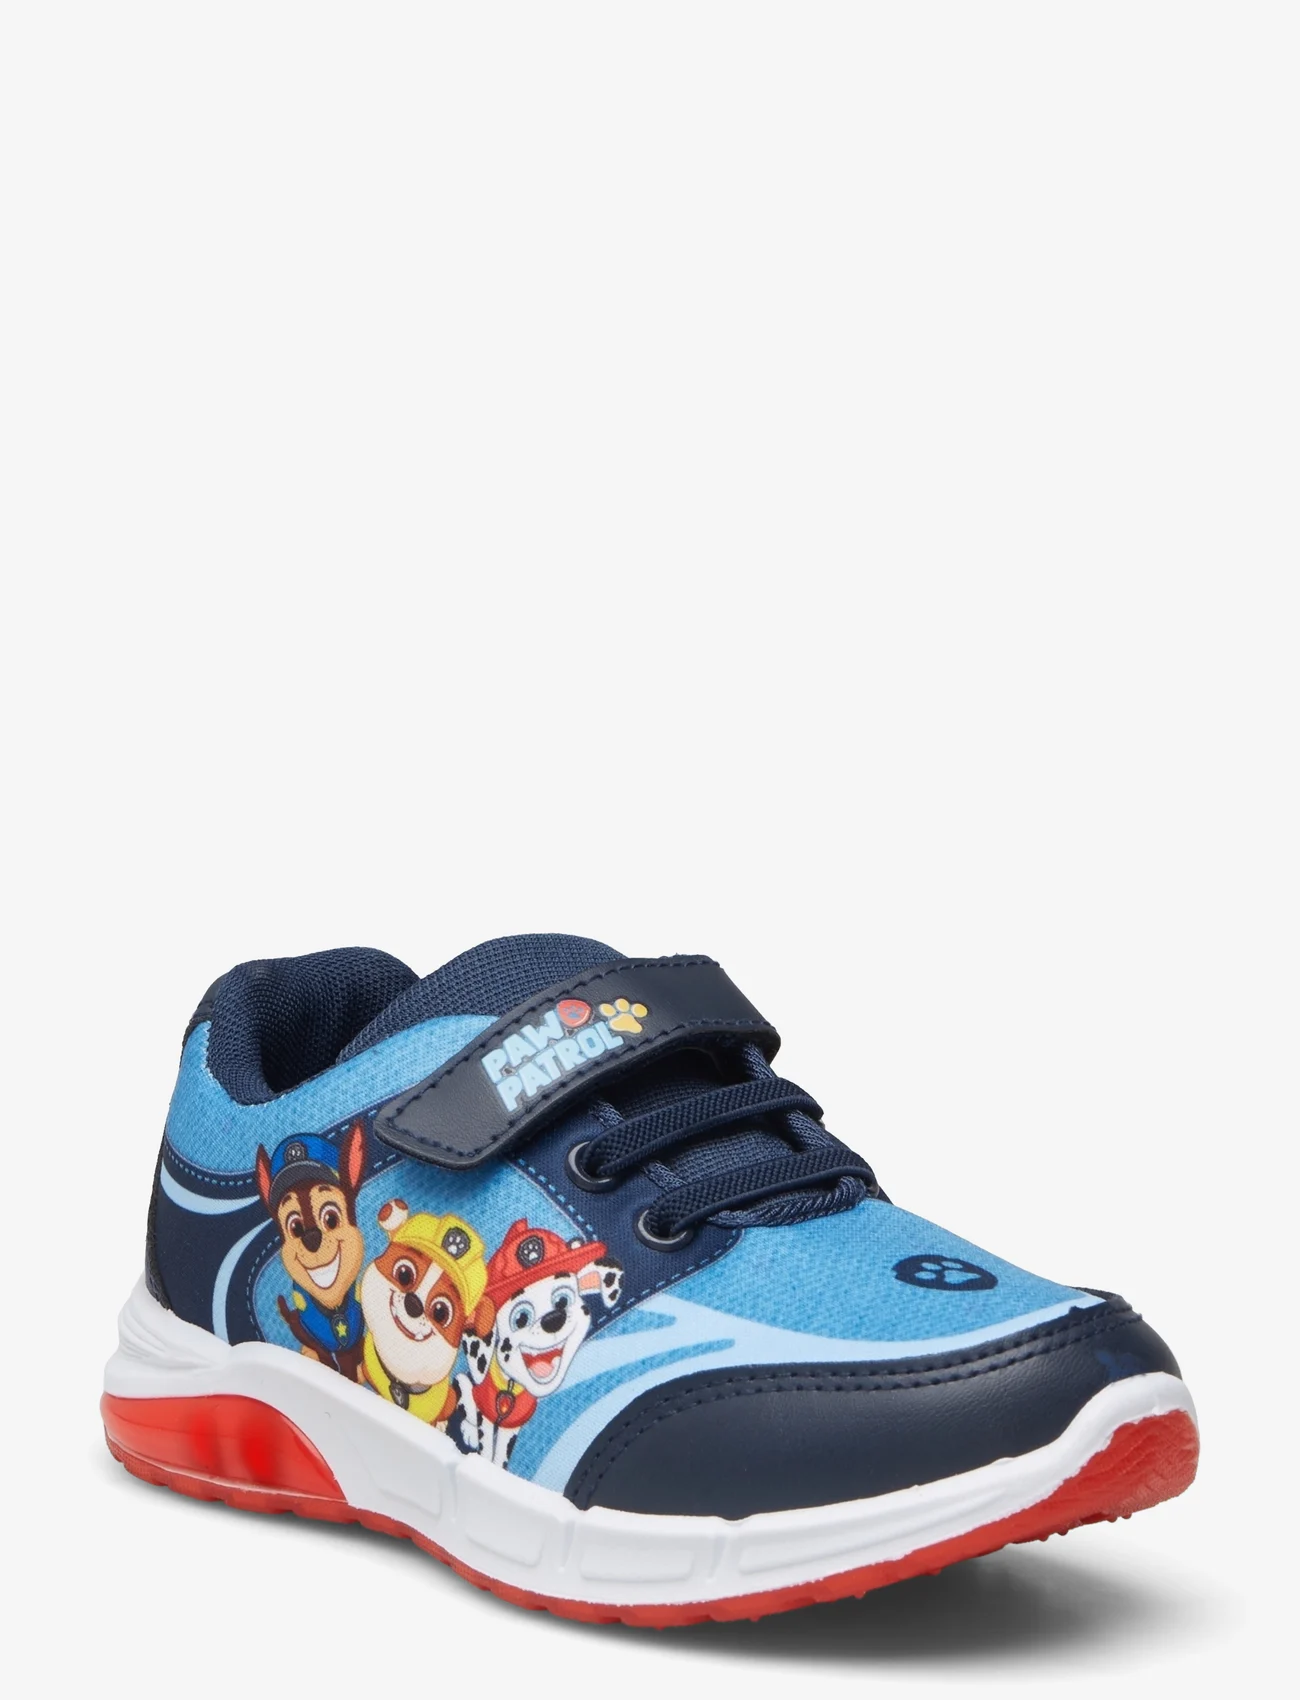 Leomil - PAWPATROL sneakers - sommarfynd - navy/red - 0